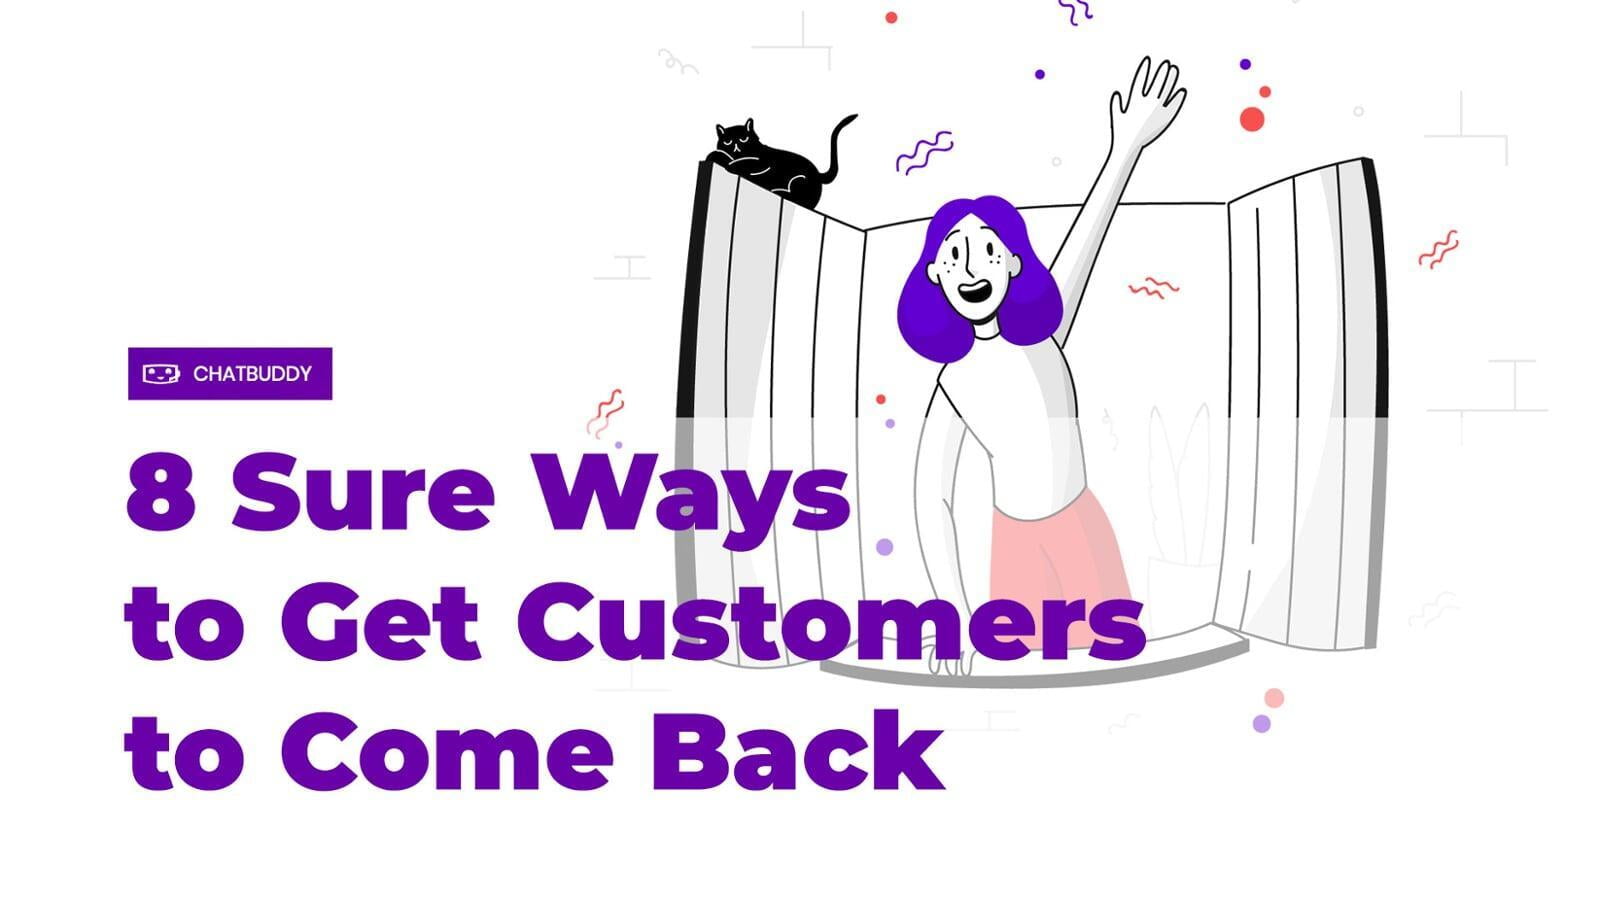 8 Sure Ways to Get Customers to Come Back